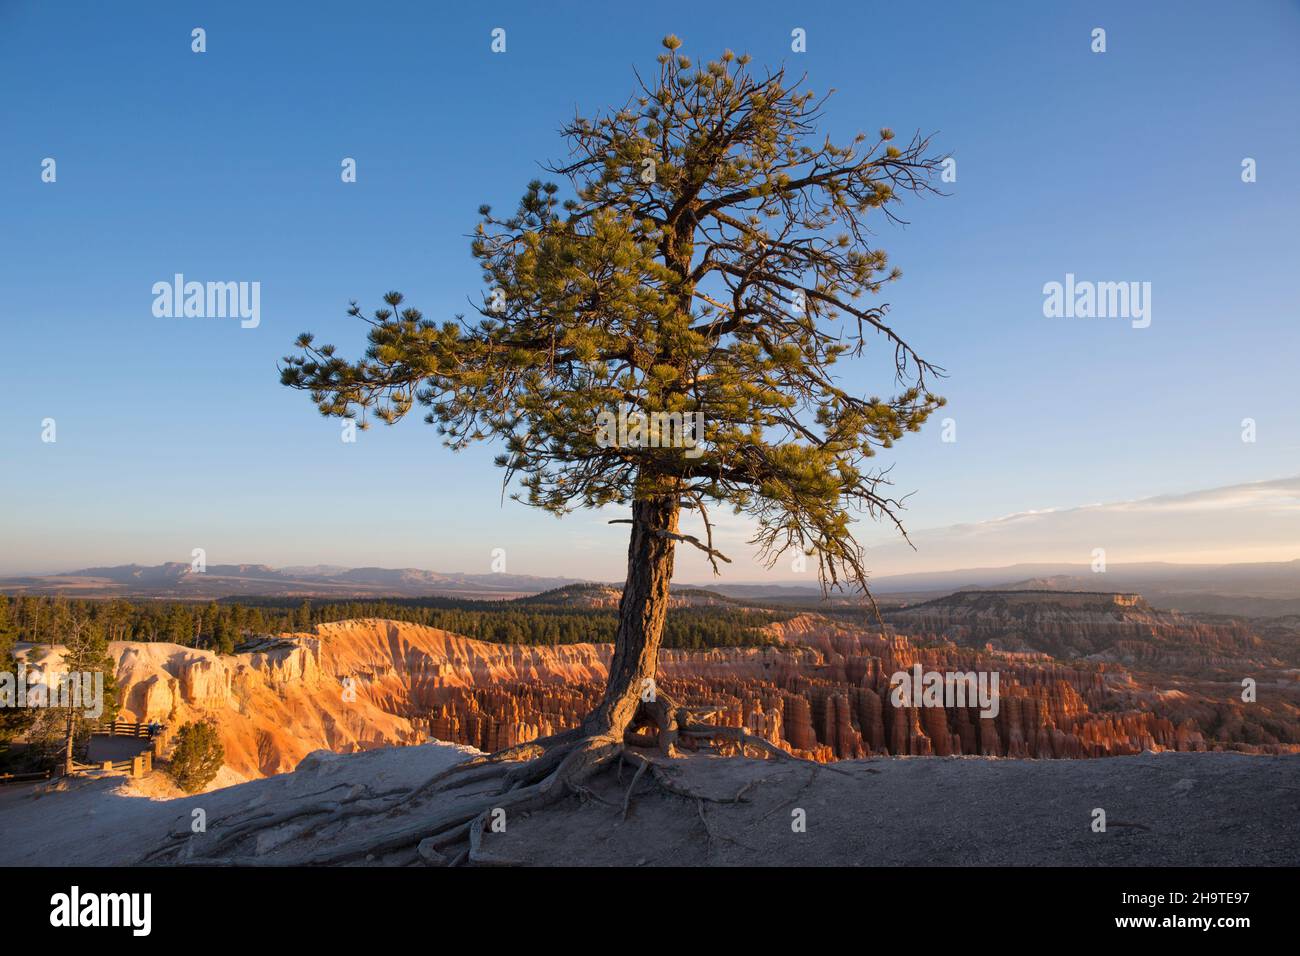 Bryce Canyon National Park, Utah, USA. View over the Silent City from the Rim Trail at Inspiration Point, sunrise, limber pine clinging to cliff edge. Stock Photo